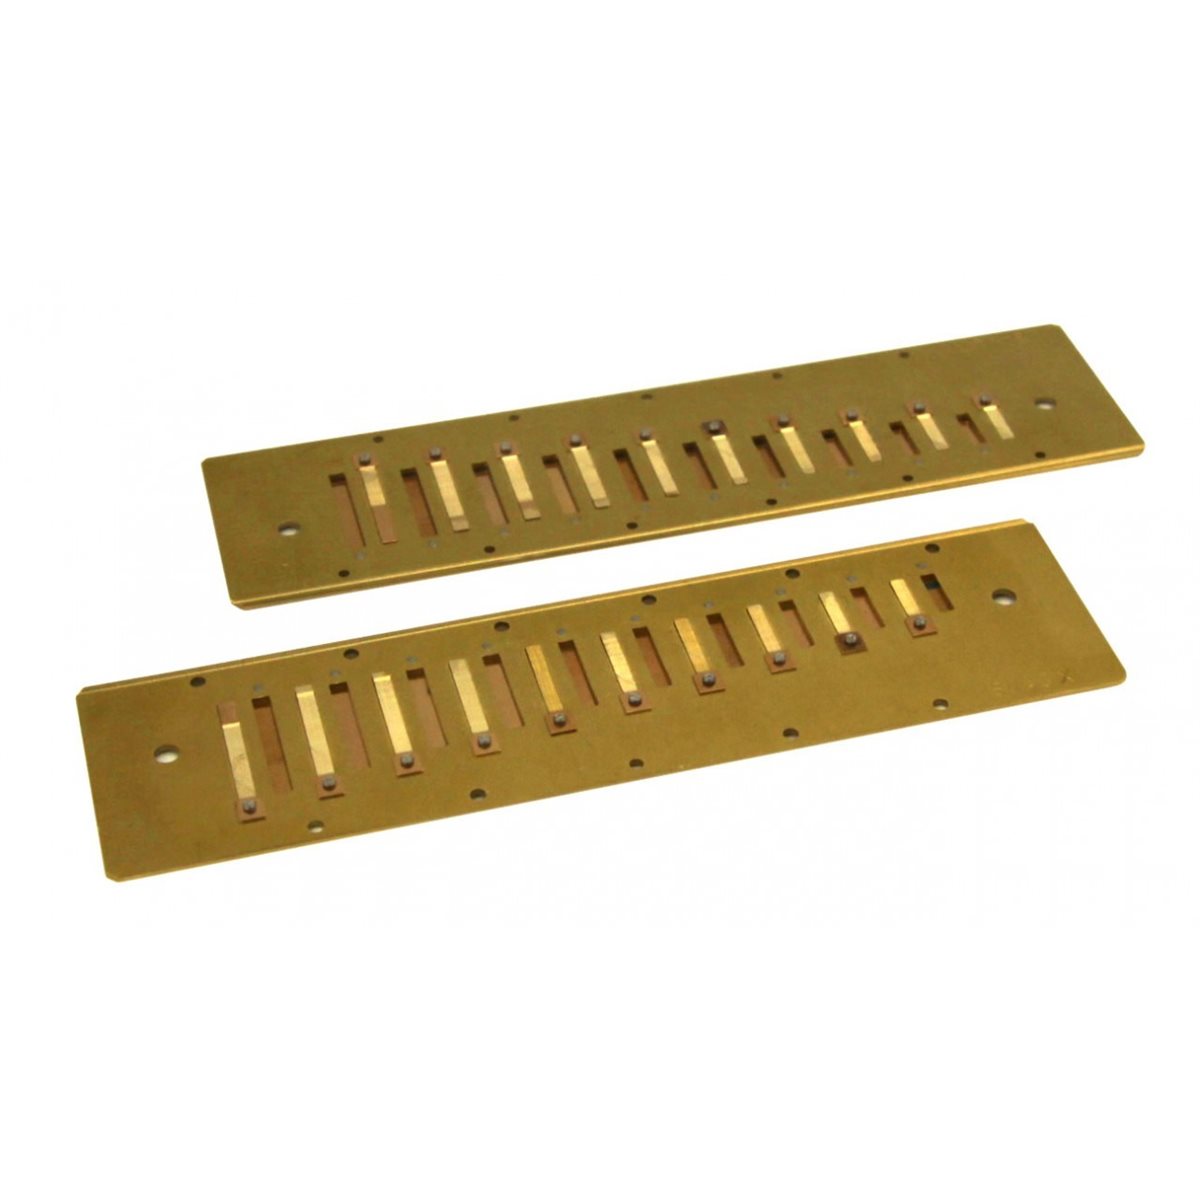 hohner - Replacement Reed Plates MS Series